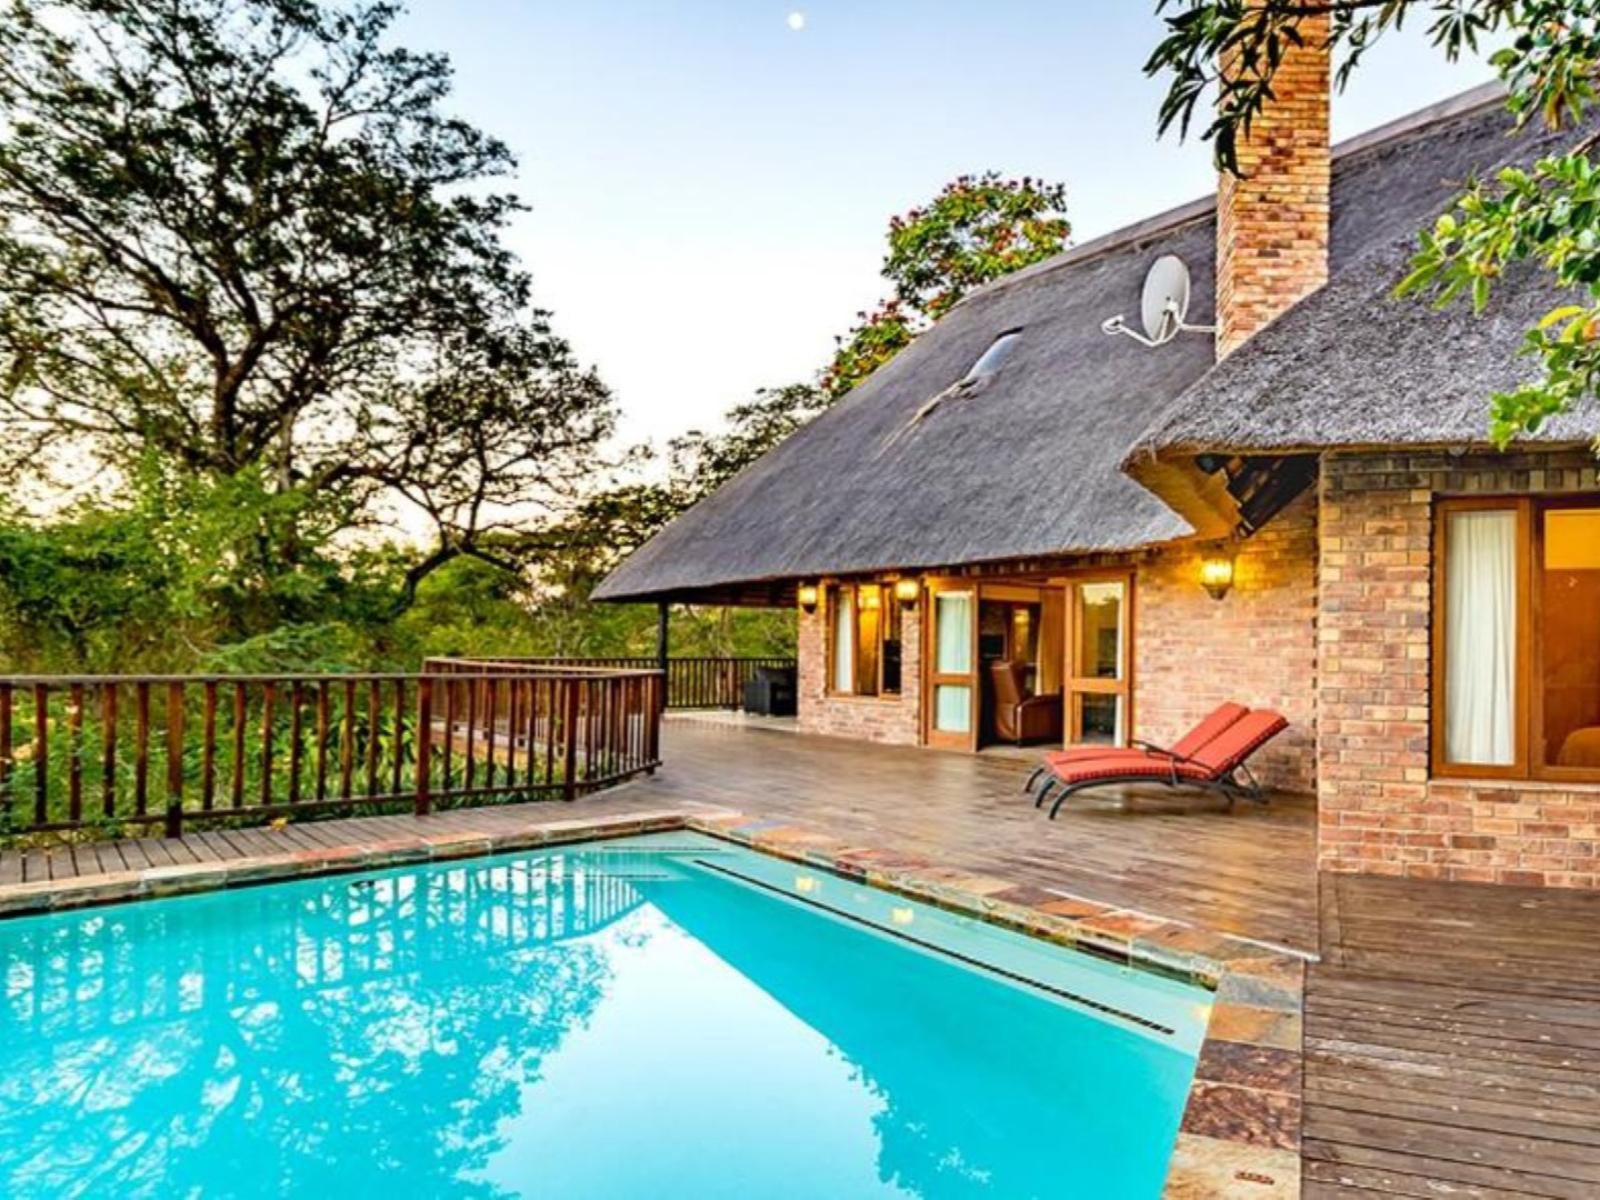 Hoyo Hoyo 573 Kruger Park Lodge Hazyview Mpumalanga South Africa Complementary Colors, Swimming Pool